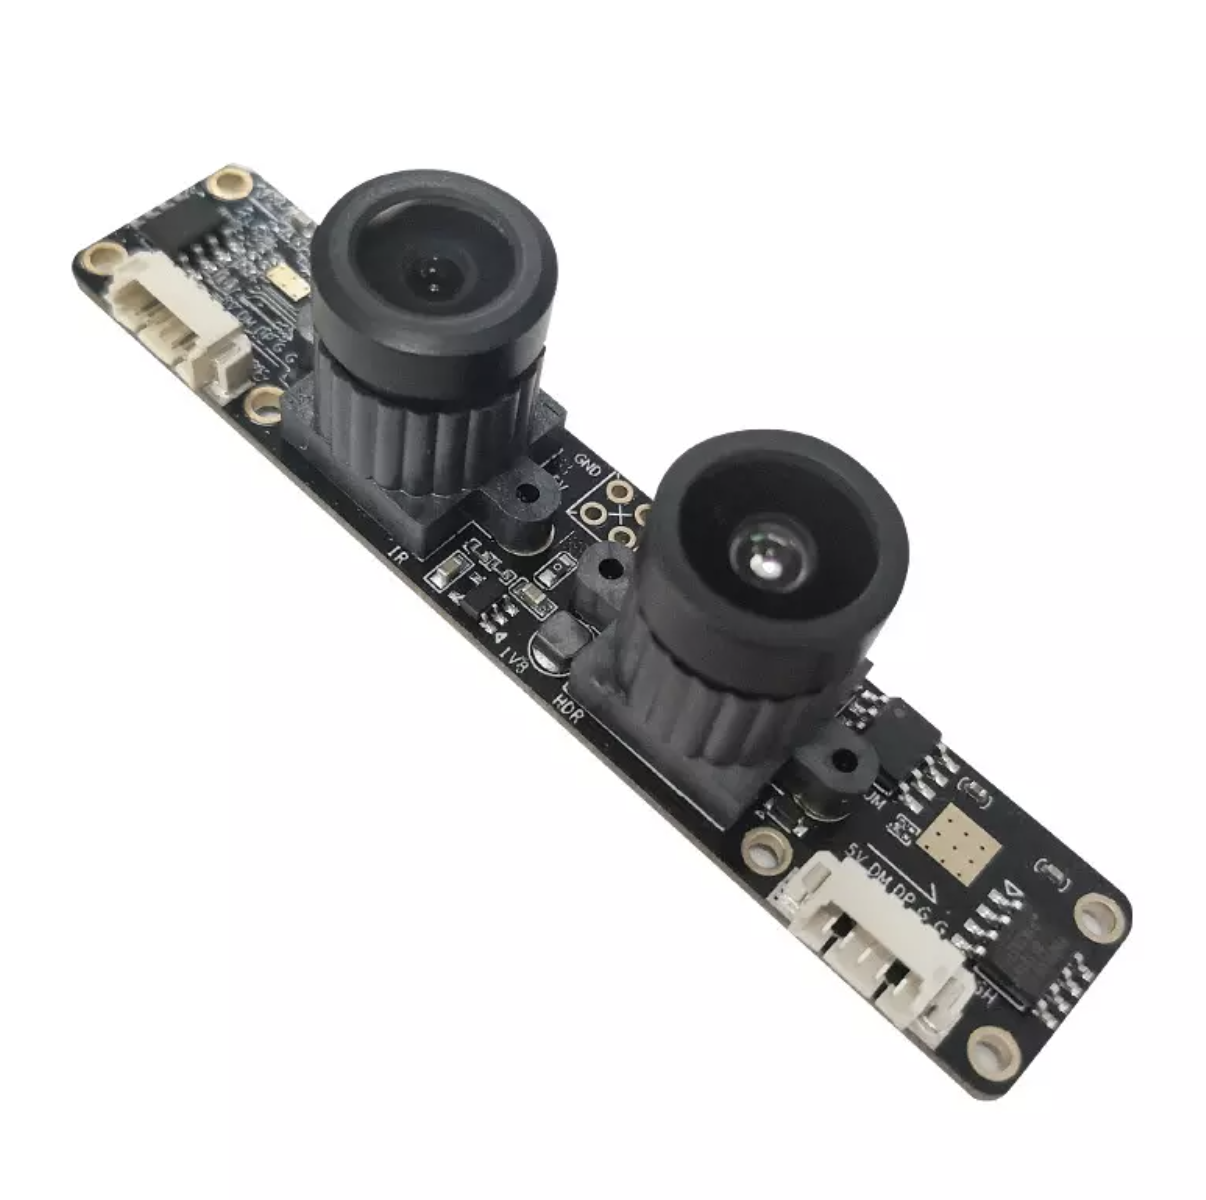 Chinese Professional Pcb Assembly -  2MP HD 1080P Face Recognition AR0230 F22 Binocular HDR IR USB2.0 Wide Angle camera module – Ronghua